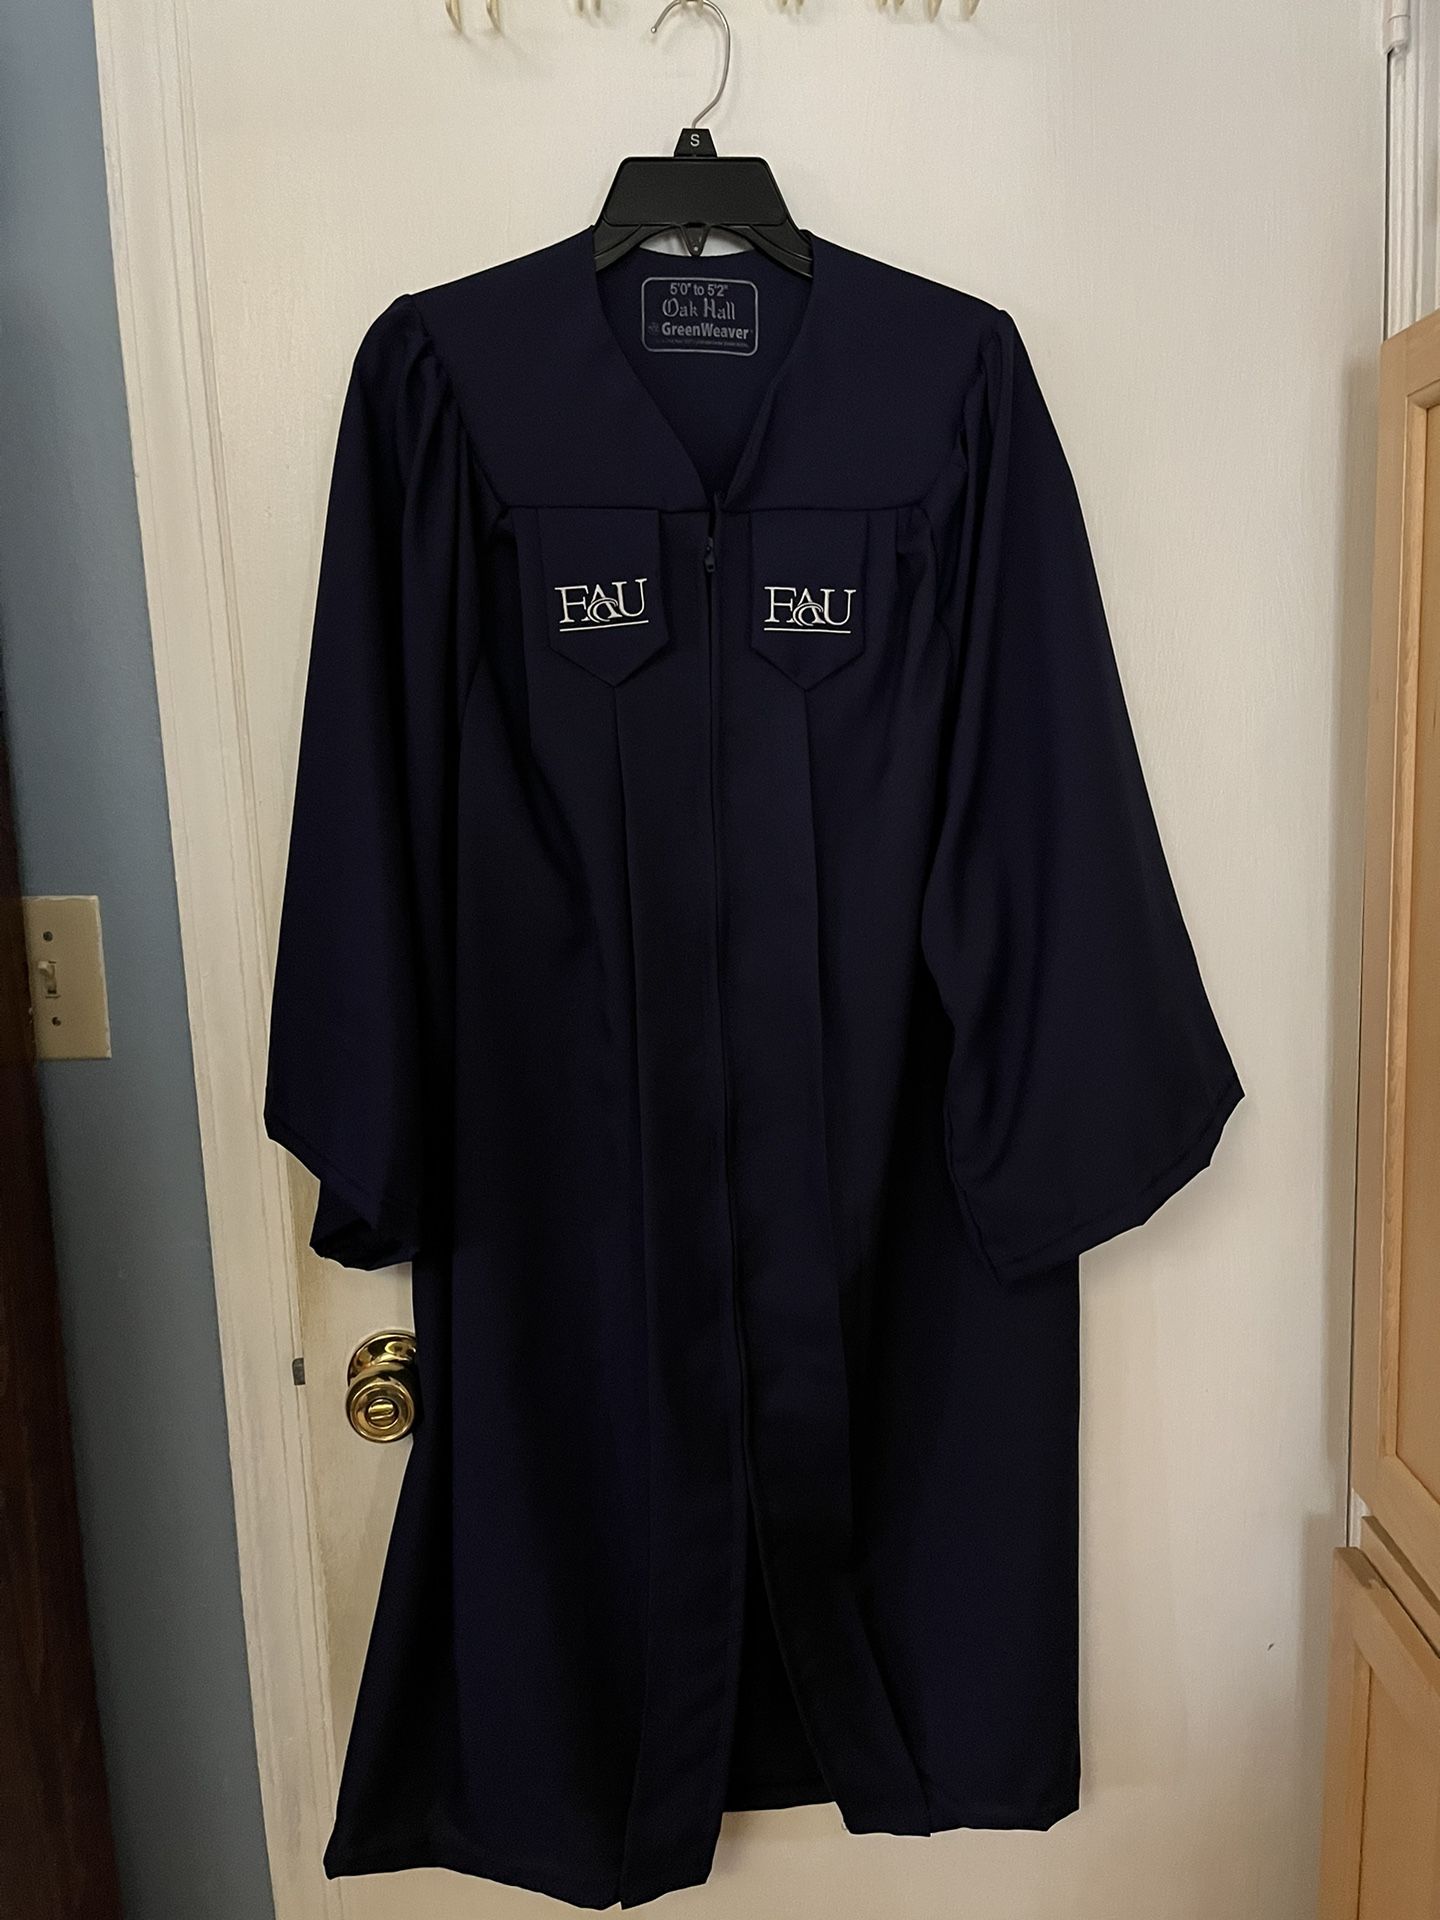 FAU Graduation Cap and Gown (Bachleor’s Degree)